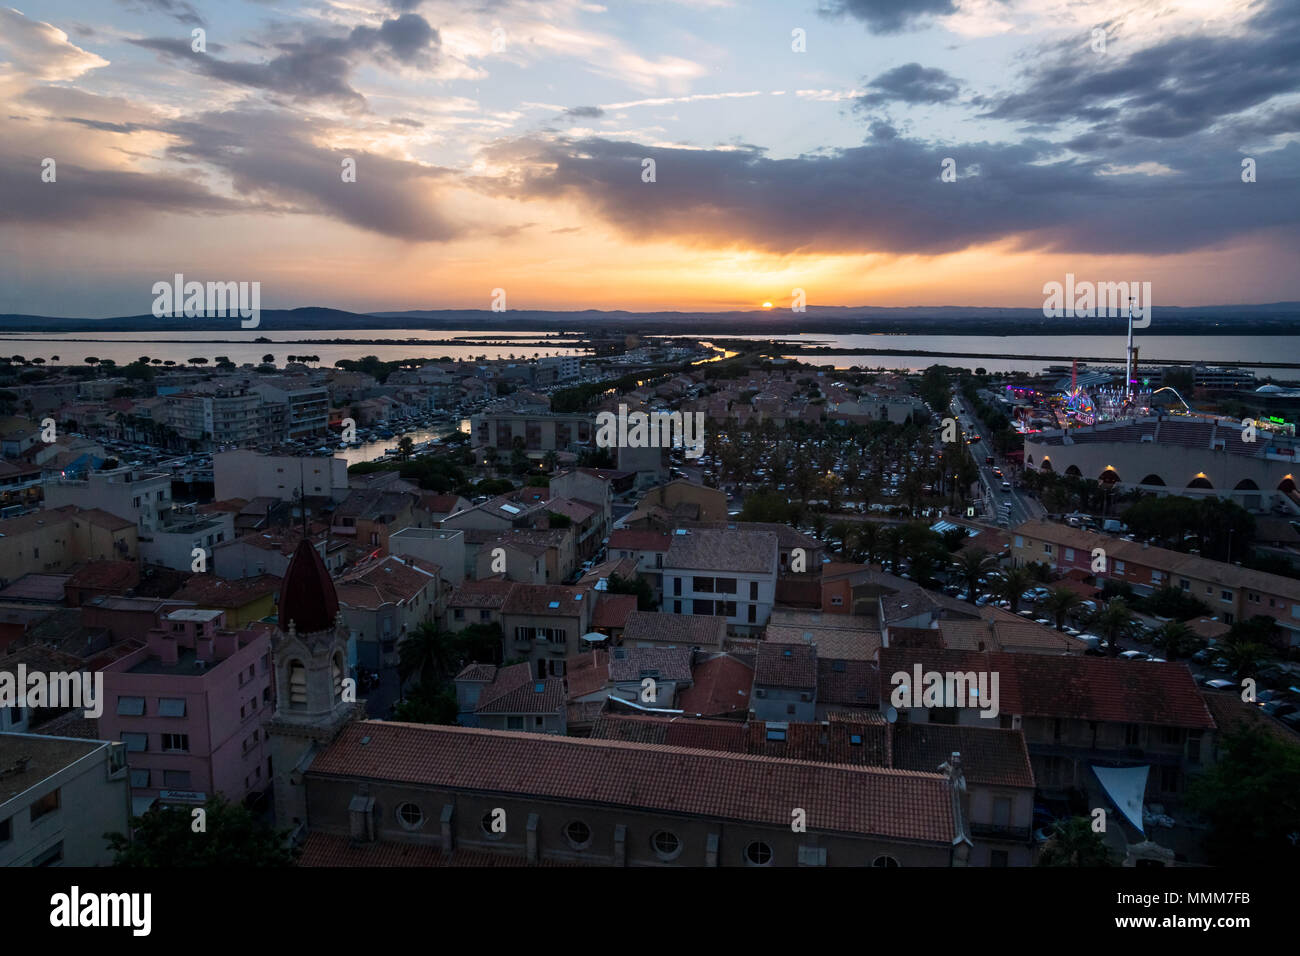 Sunset on French city of Palavas-les-Flots, view on the city underneath. Stock Photo